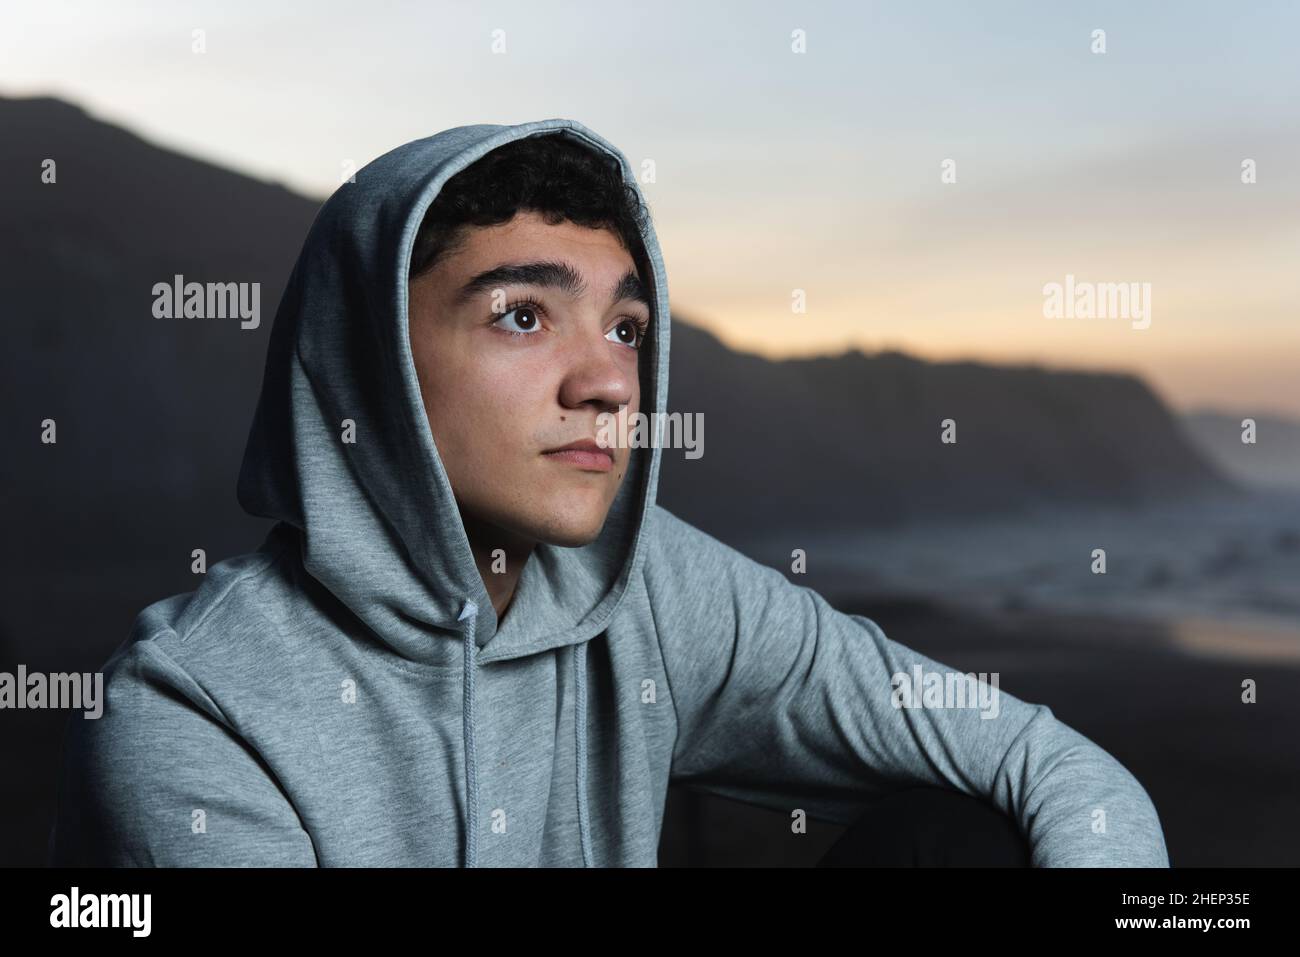 Portrait of thoughtful adolescent wearing a sweater at sunset. Stock Photo